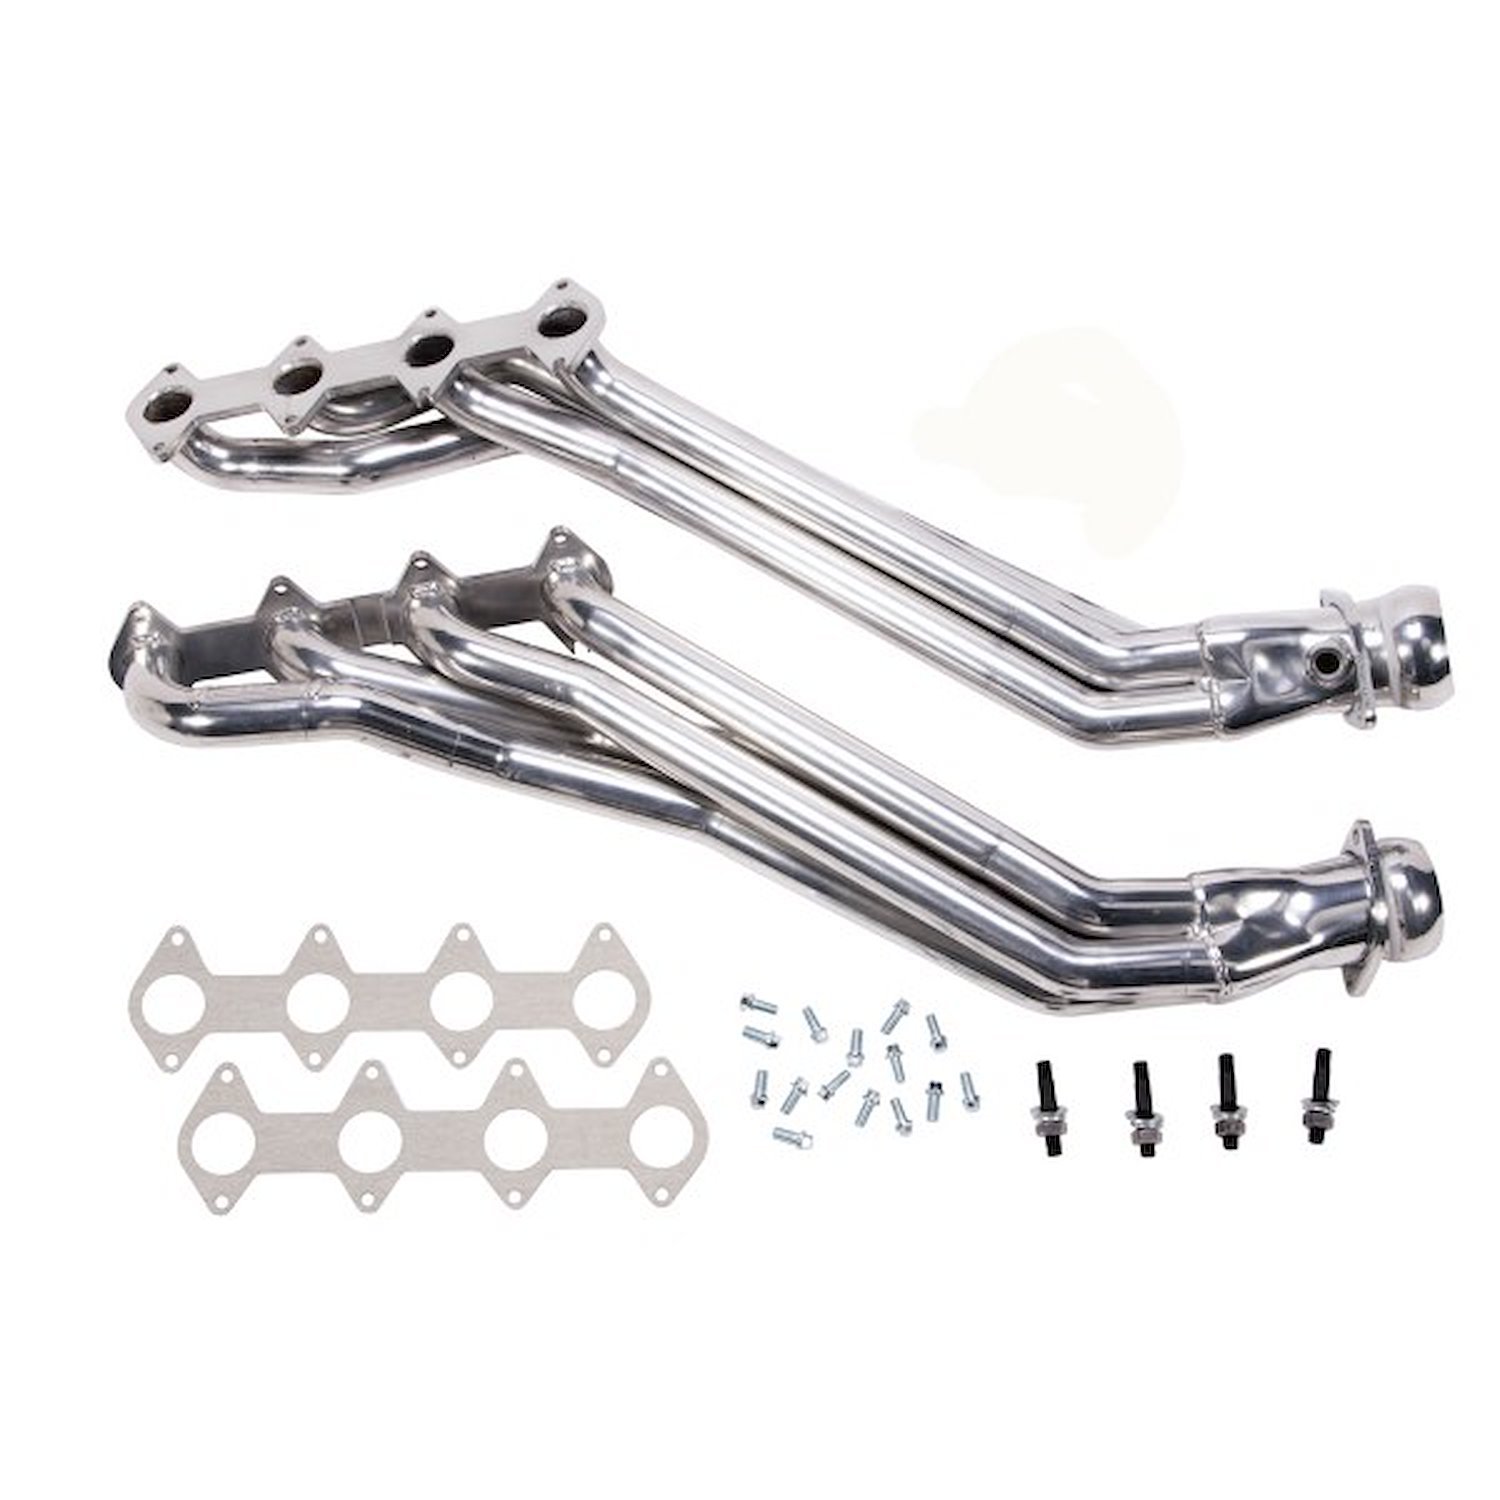 Long-Tube Headers 2005-2010 Ford Mustang GT 4.6L with Manual Transmission [Silver Ceramic Finish]